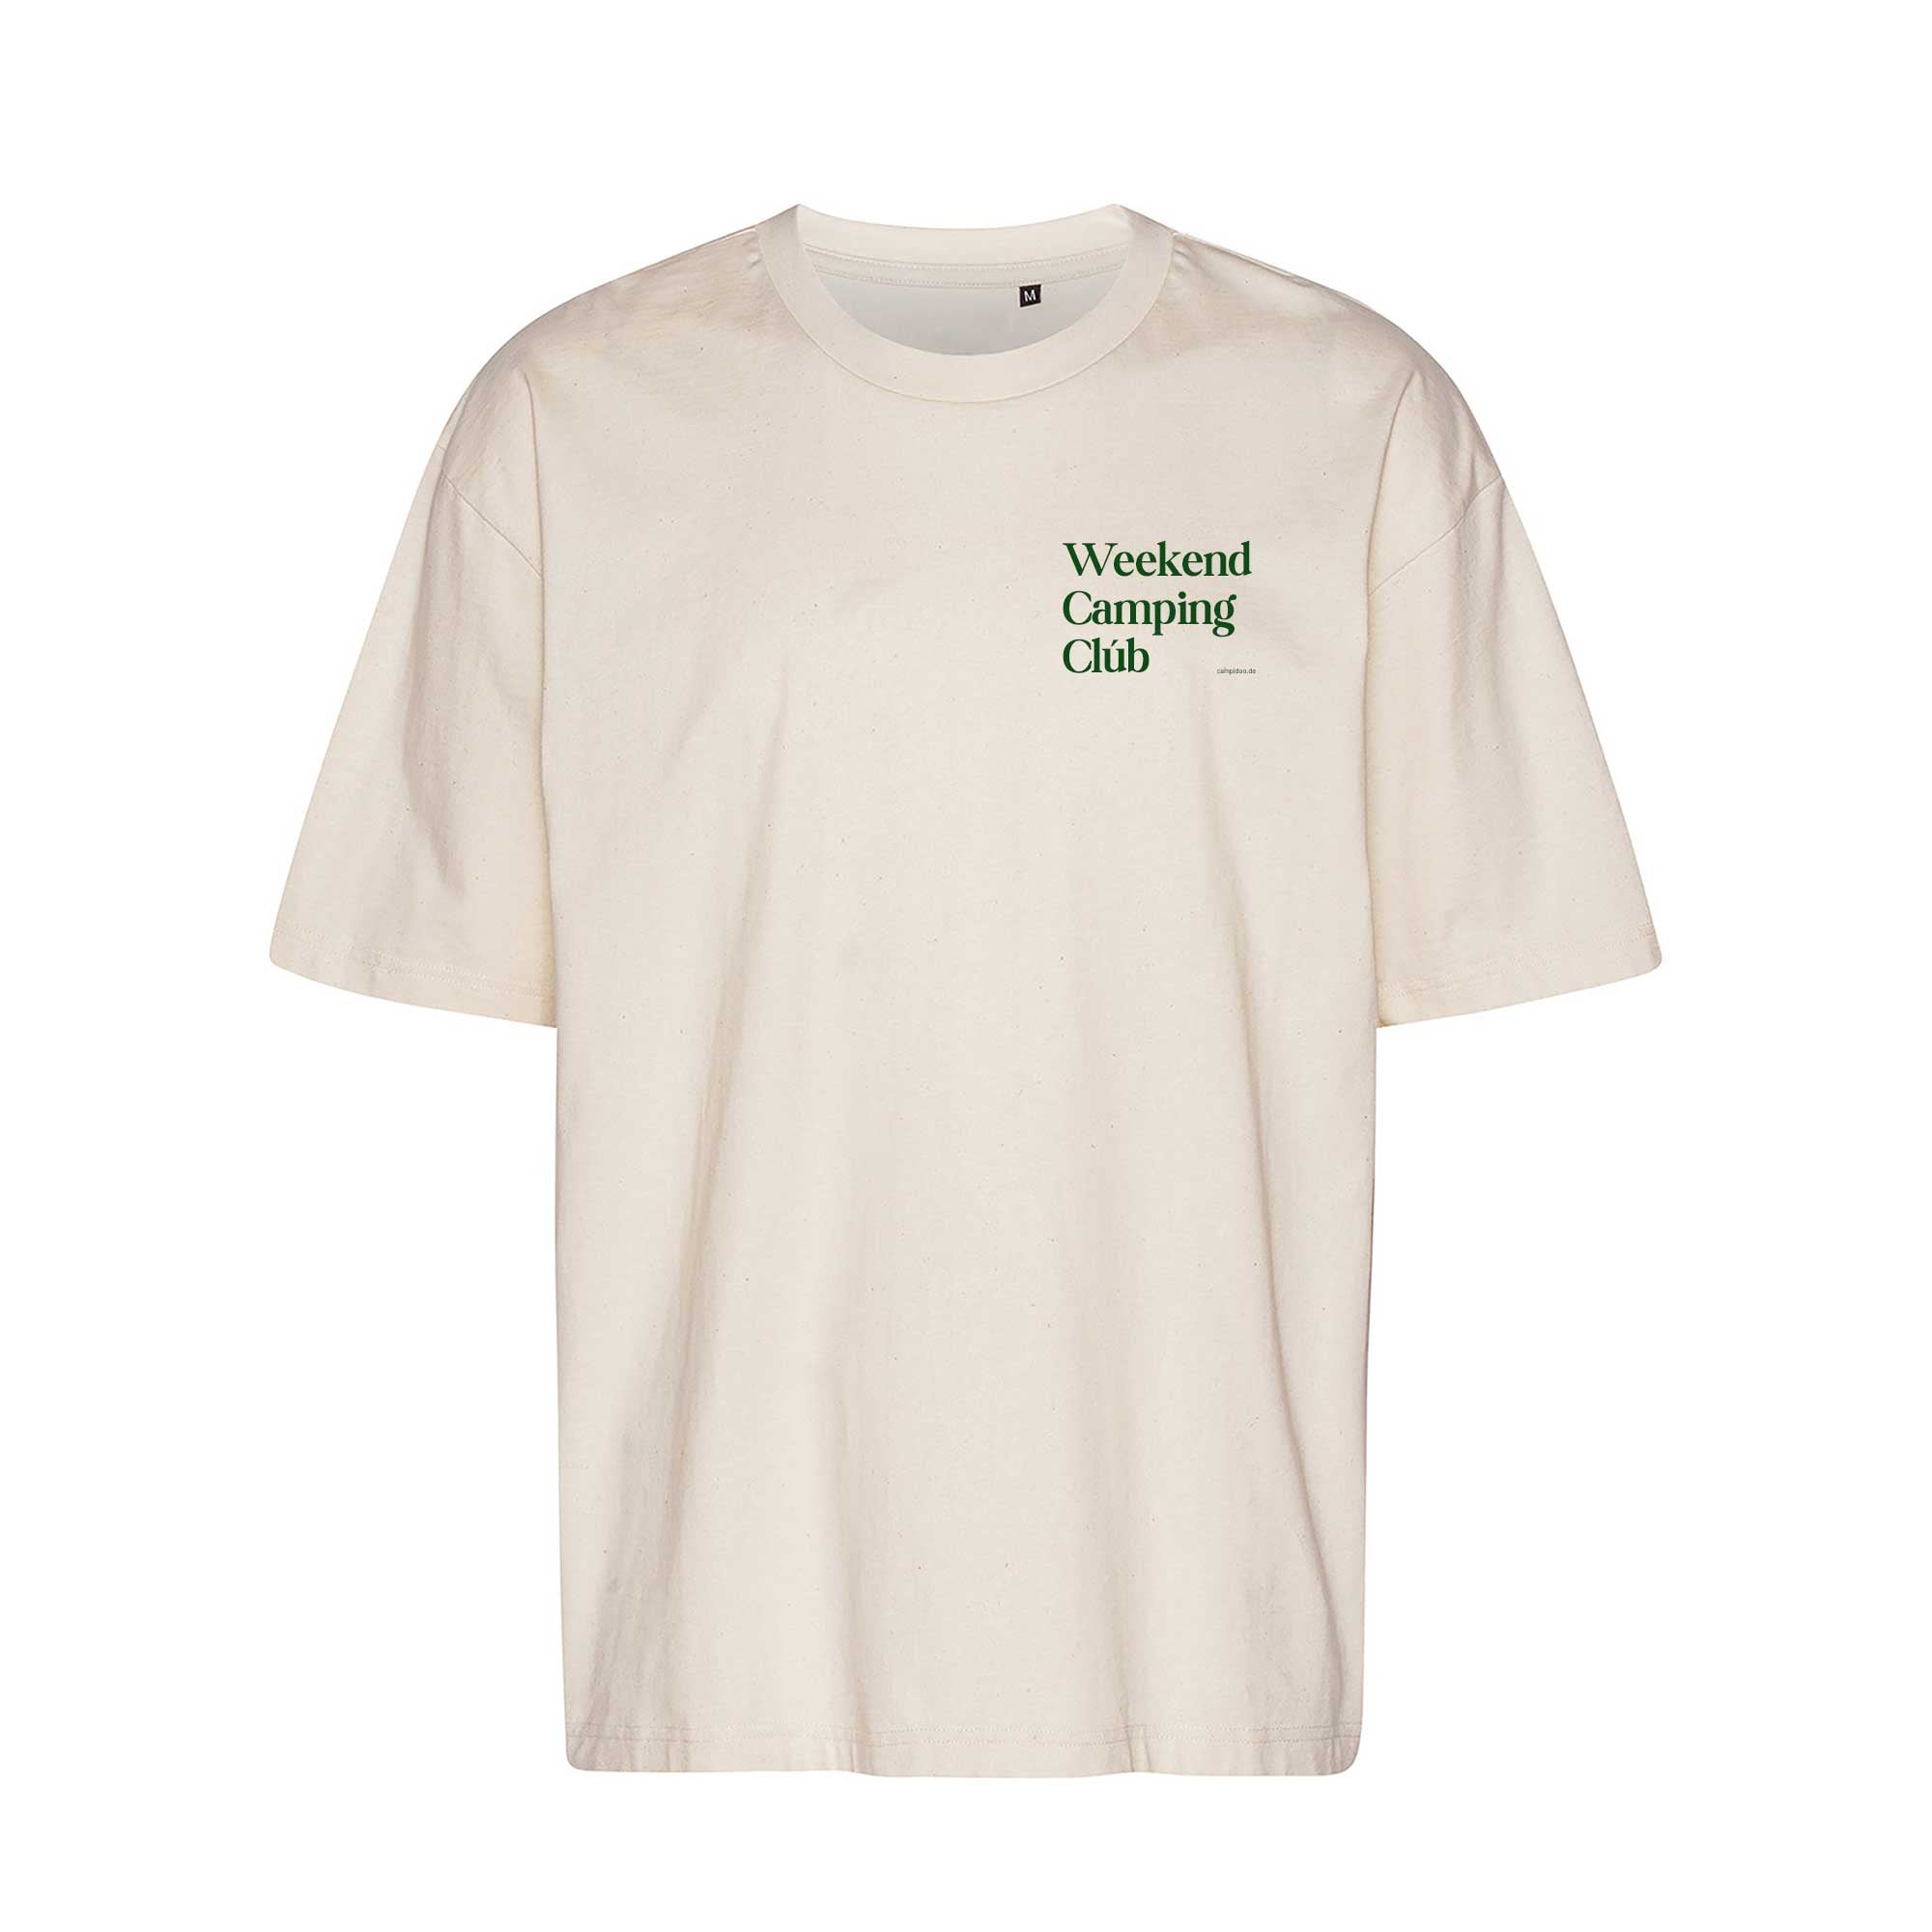 Oversized T-Shirt OFF-WHITE "Weekend Camping Club"